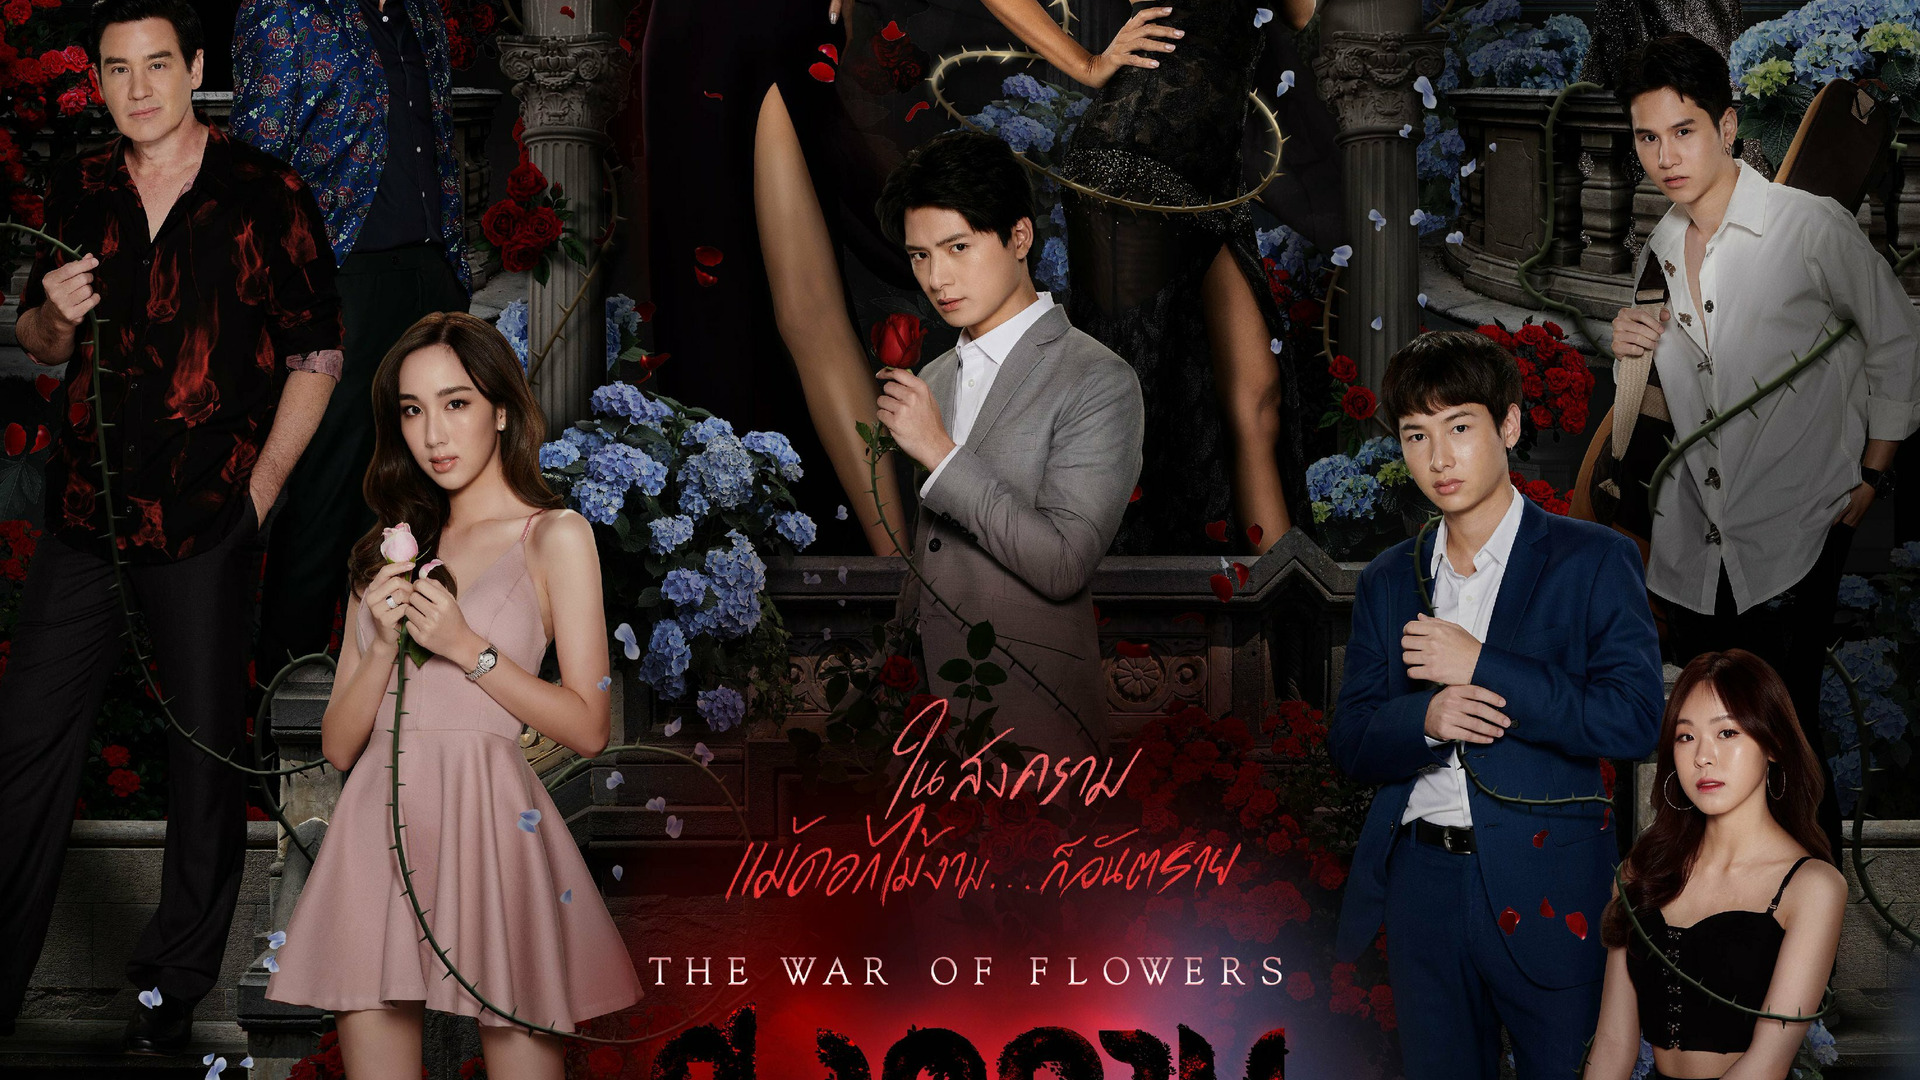 Show The War of Flowers